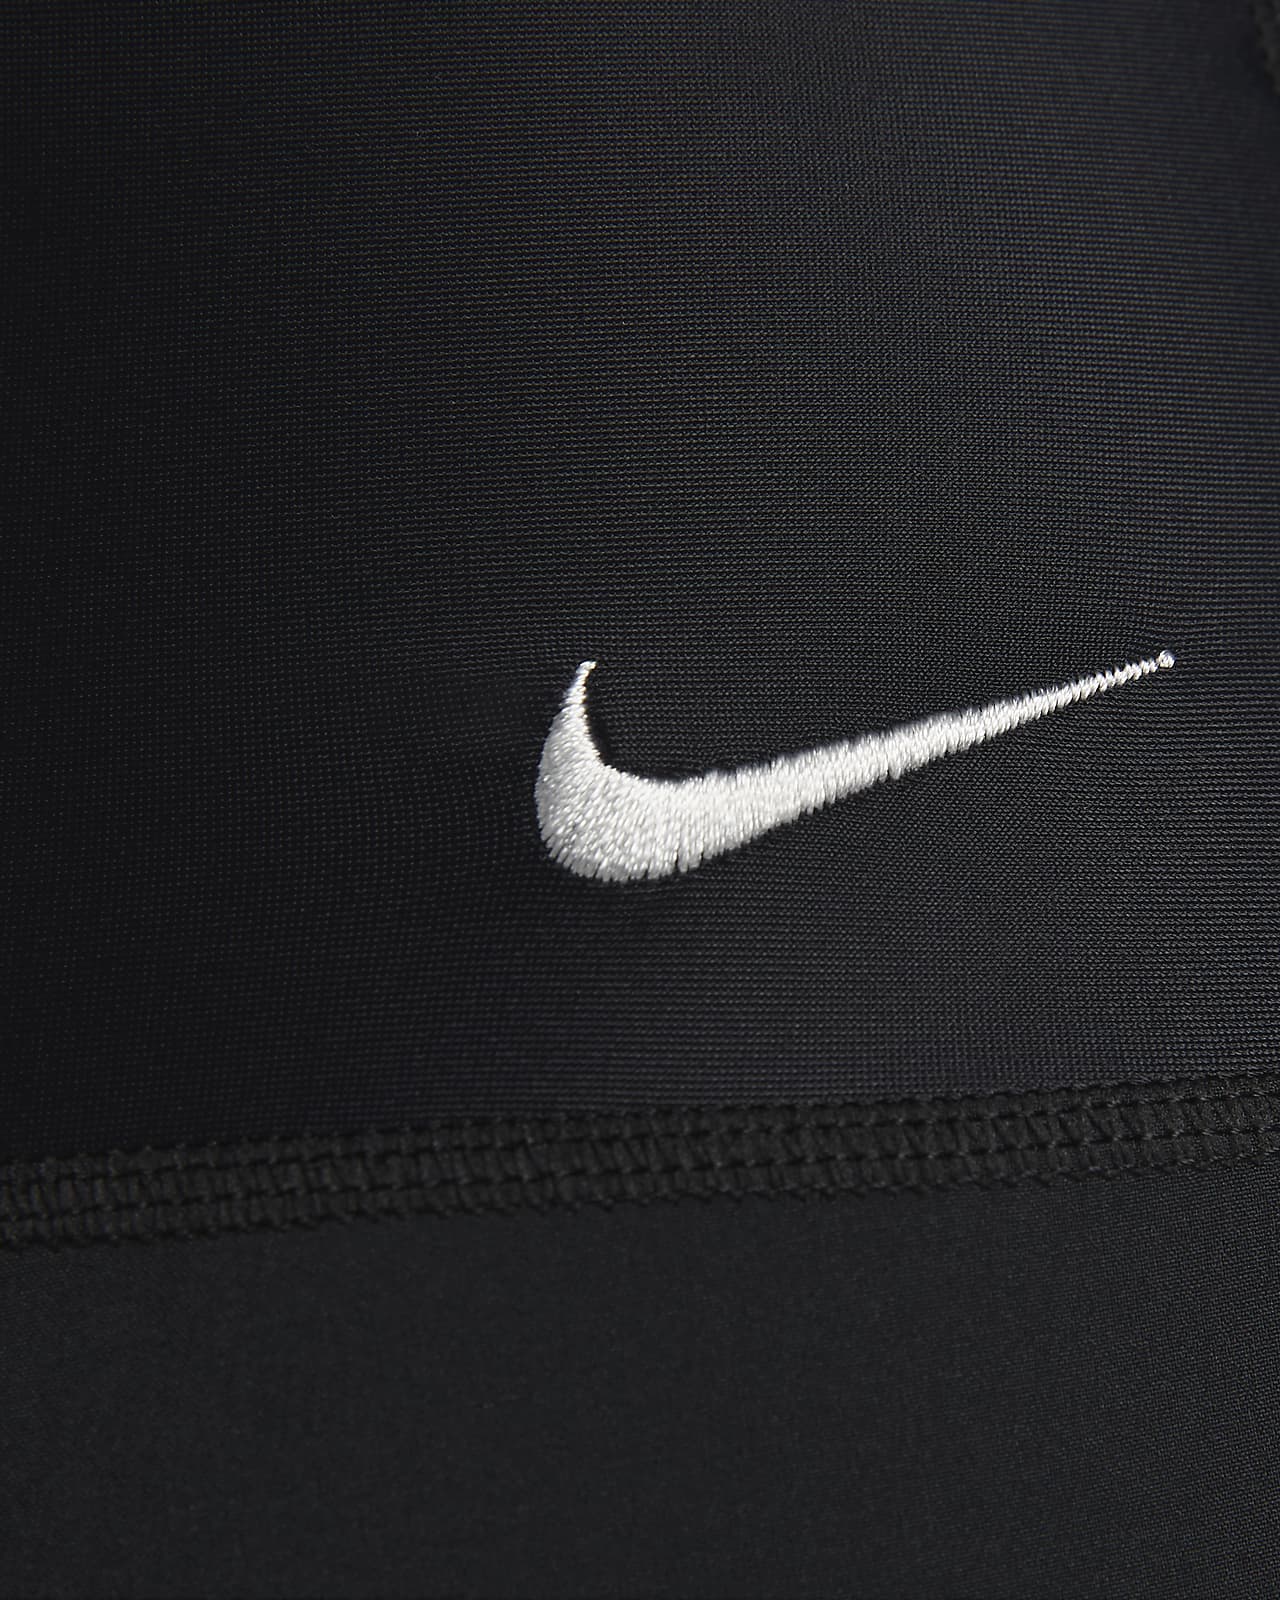 Nike Dri-Fit Athletic Pants Women's Black New with Tags XL 863